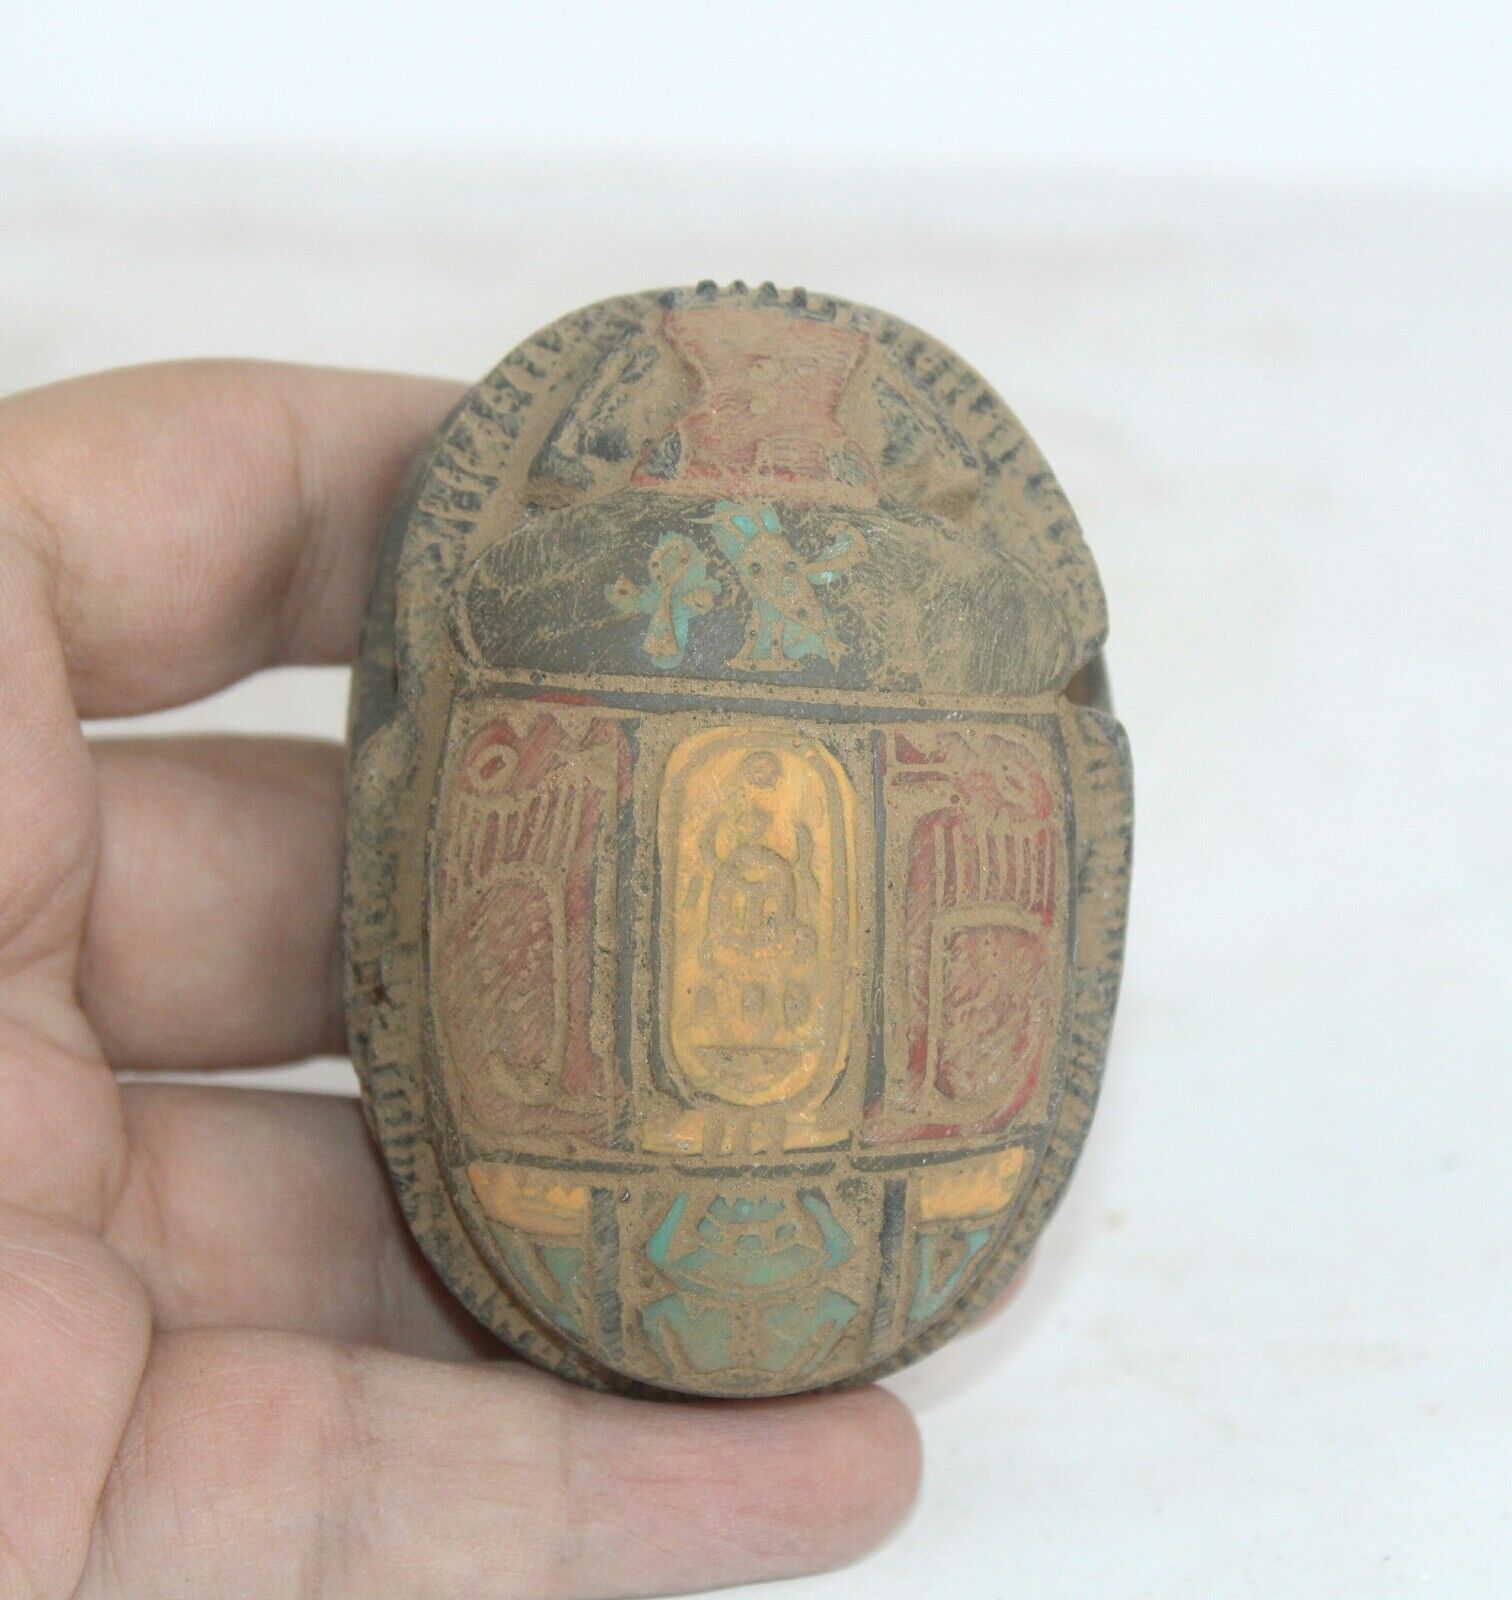 Rare Ancient Pharaonic Carved Stone Scarab Amulet For Protection BC Egyptology